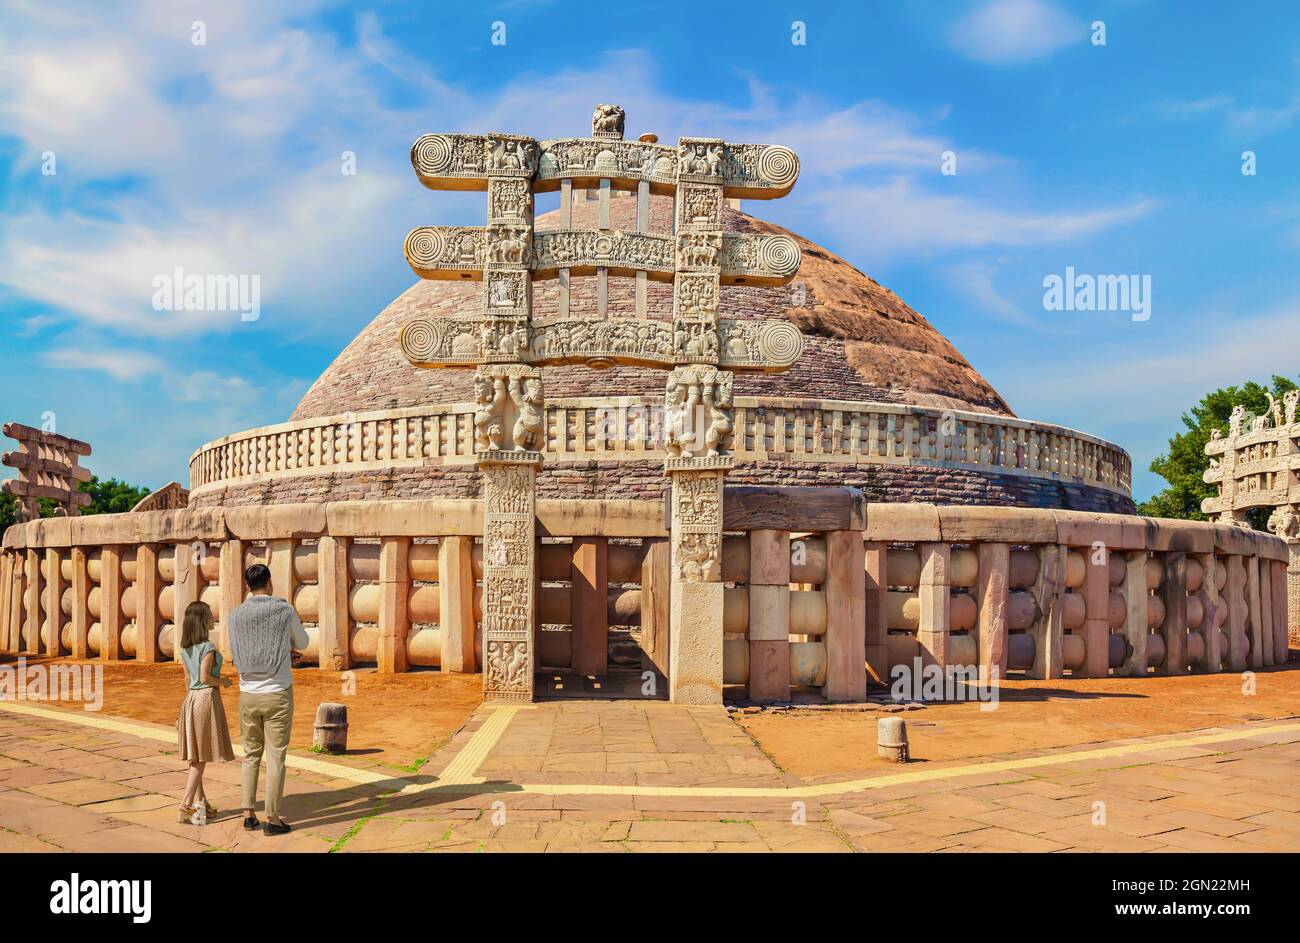 Tourist couple at Sanchi Stupa - a Buddhist stone structure located on a hilltop at Sanchi Town in Raisen District at Madhya Pradesh, India Stock Photo